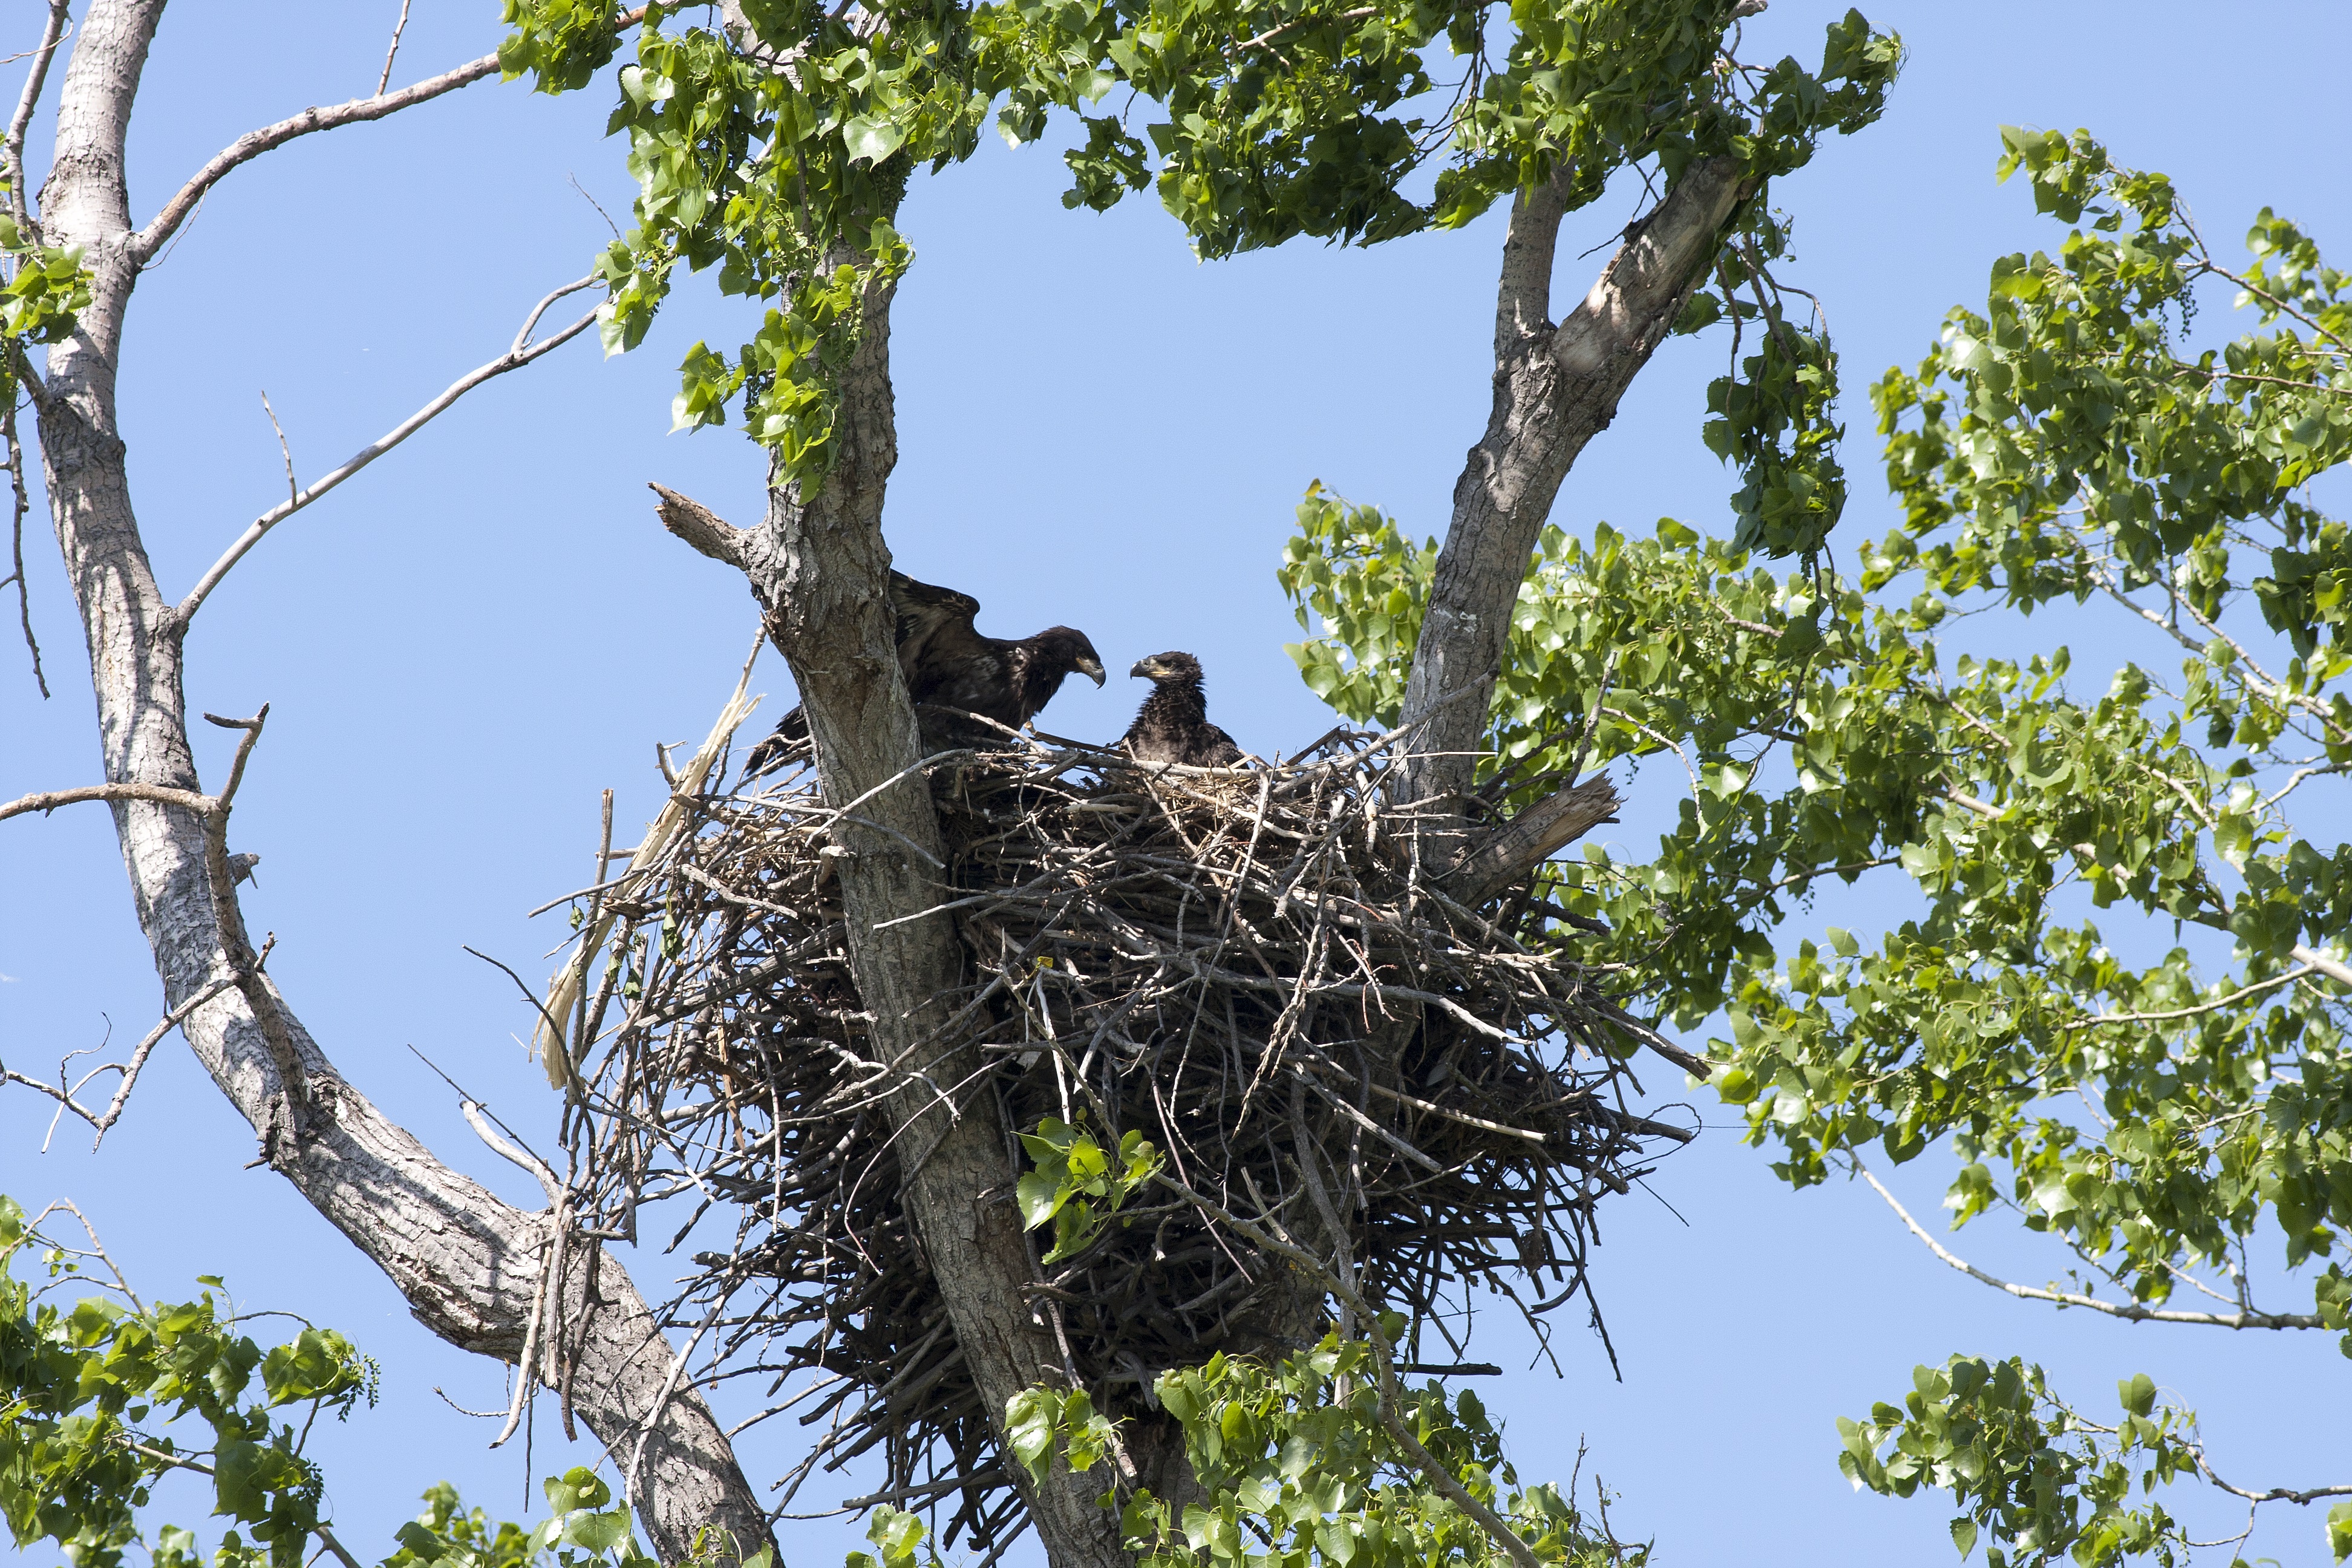 Juvenile bald eagles in the nest with one spreading its nest and the other perched. 